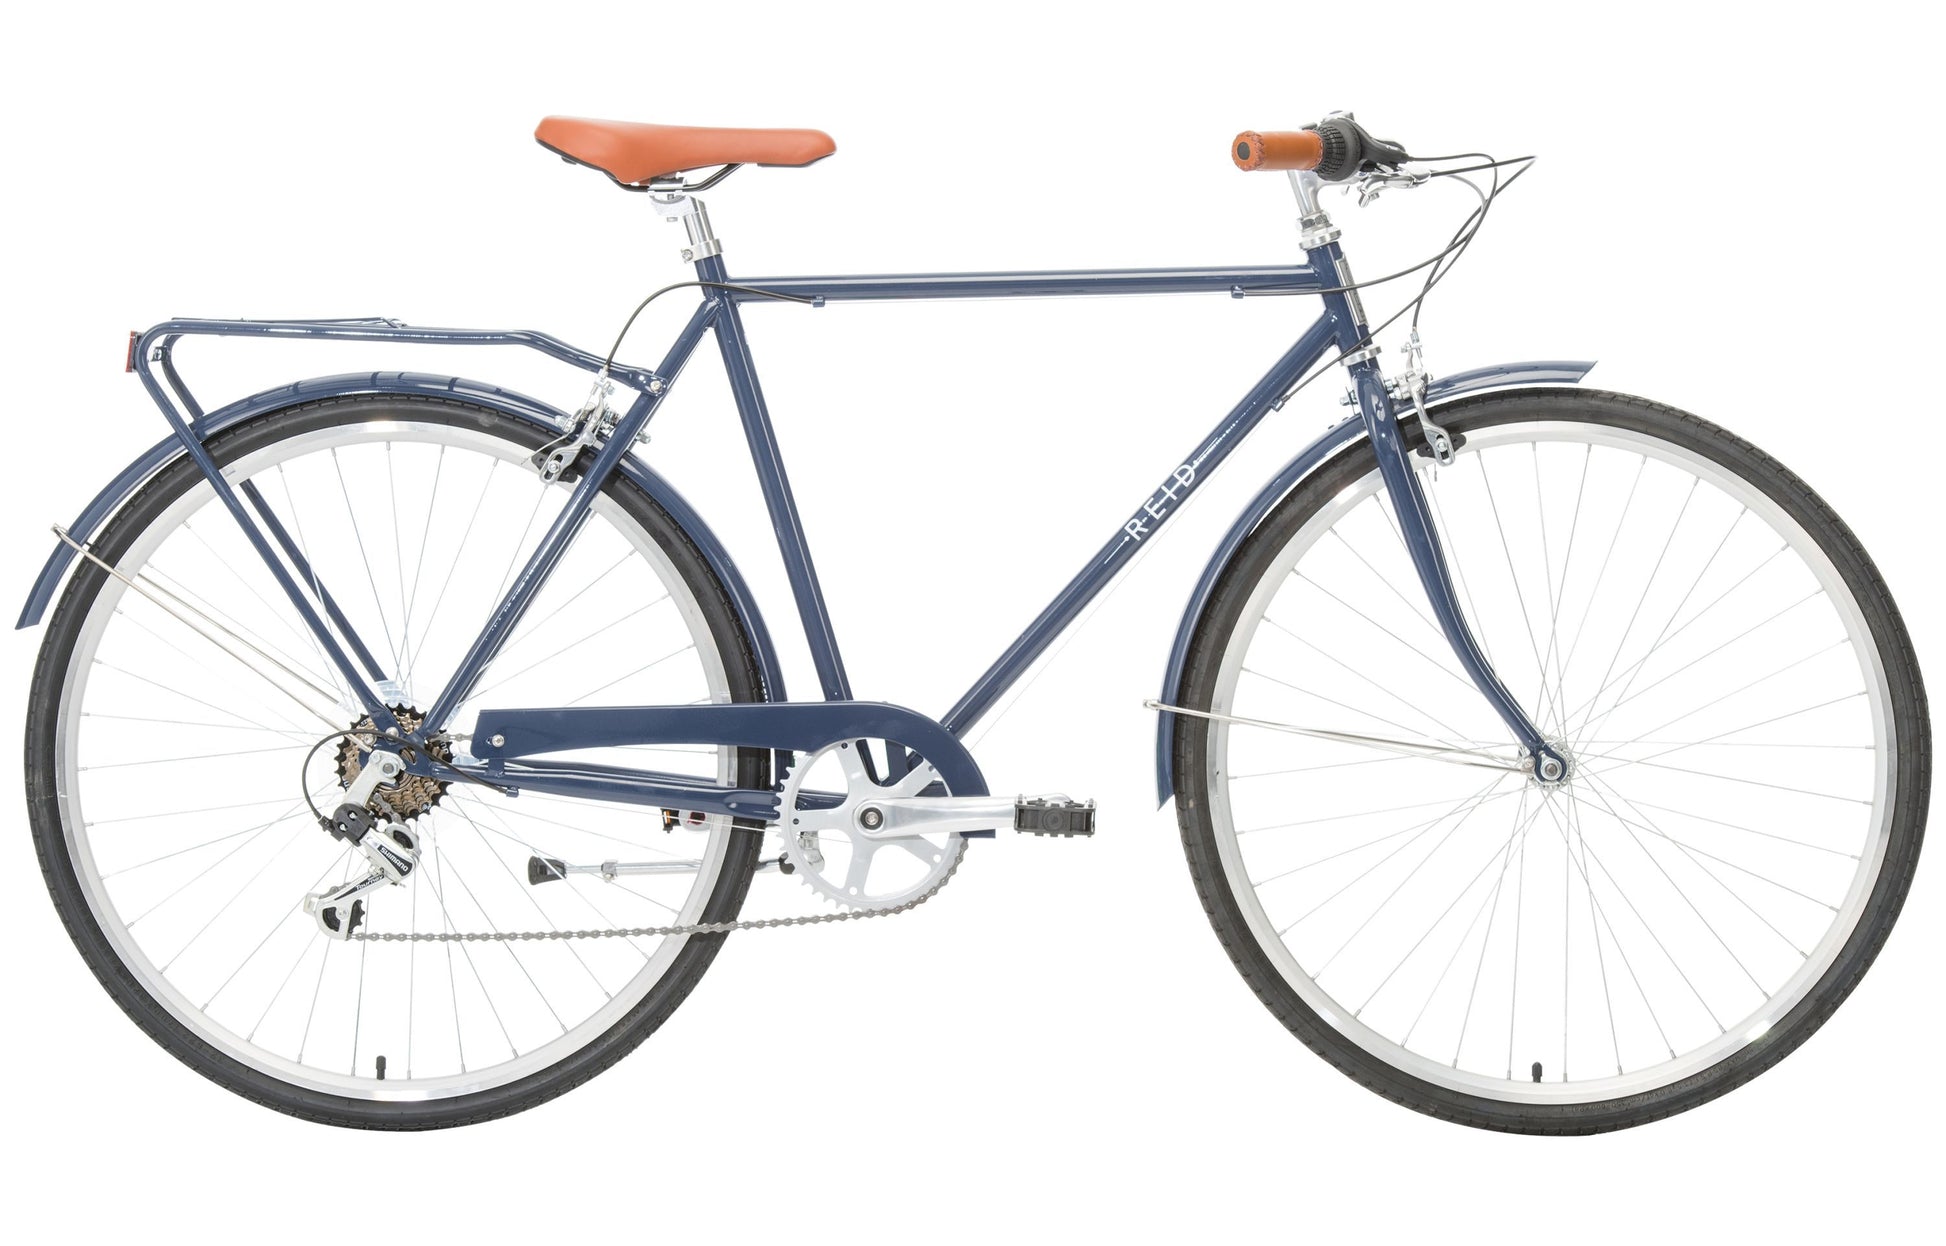 Roadster Vintage Bike in Navy with 7-speed Shimano gearing from Reid Cycles Australia